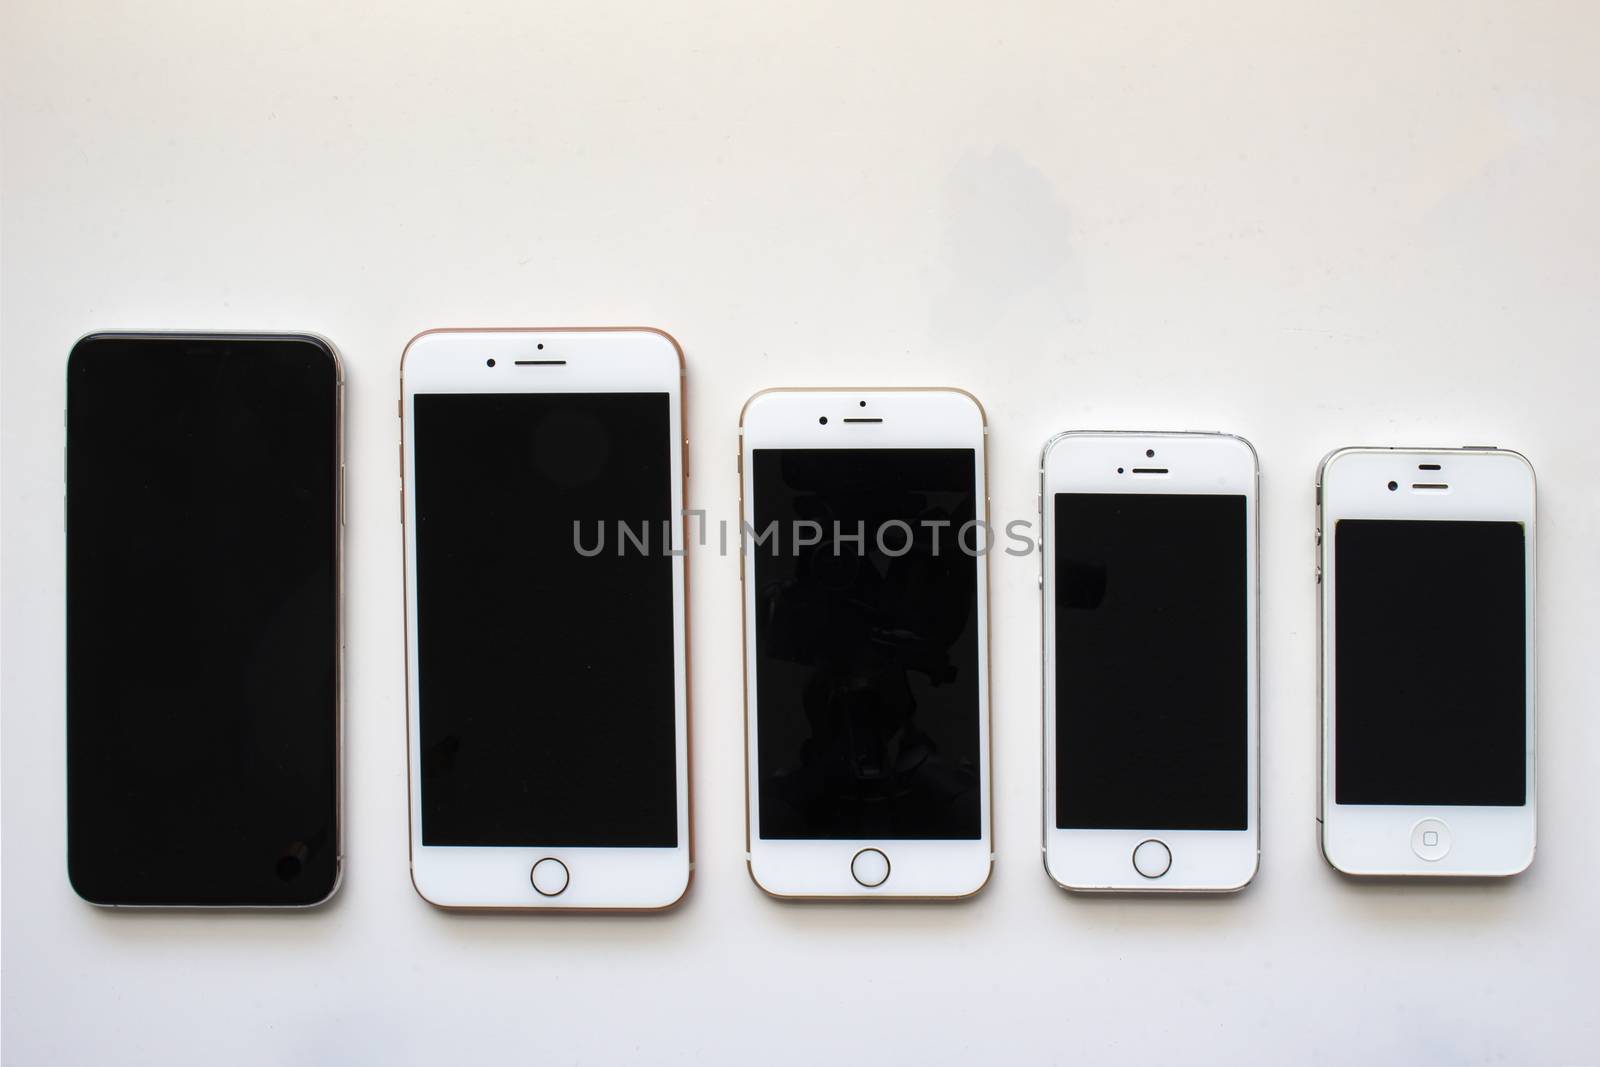 Calgary, Alberta, Canada. Aug 22, 2020. Several iPhone screens from view on a white background. by oasisamuel